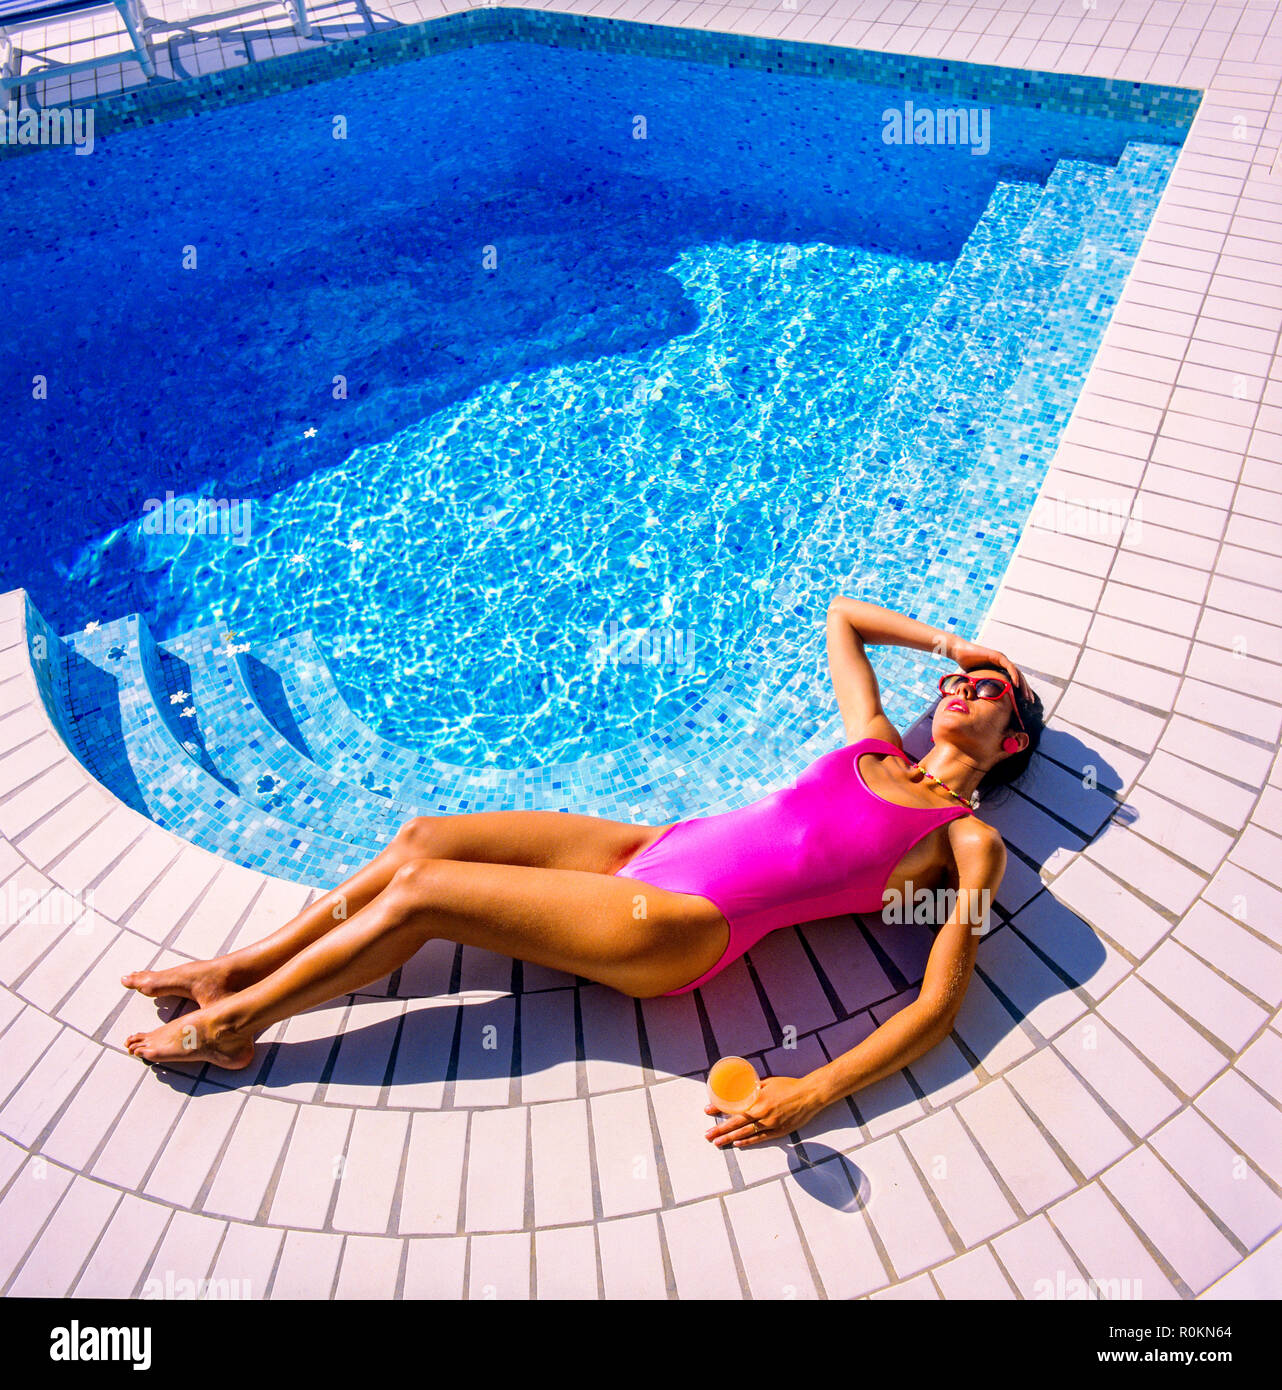 Young woman with pink swimsuit sunbathing at poolside, swimming pool, Guadeloupe, French West Indies, Stock Photo